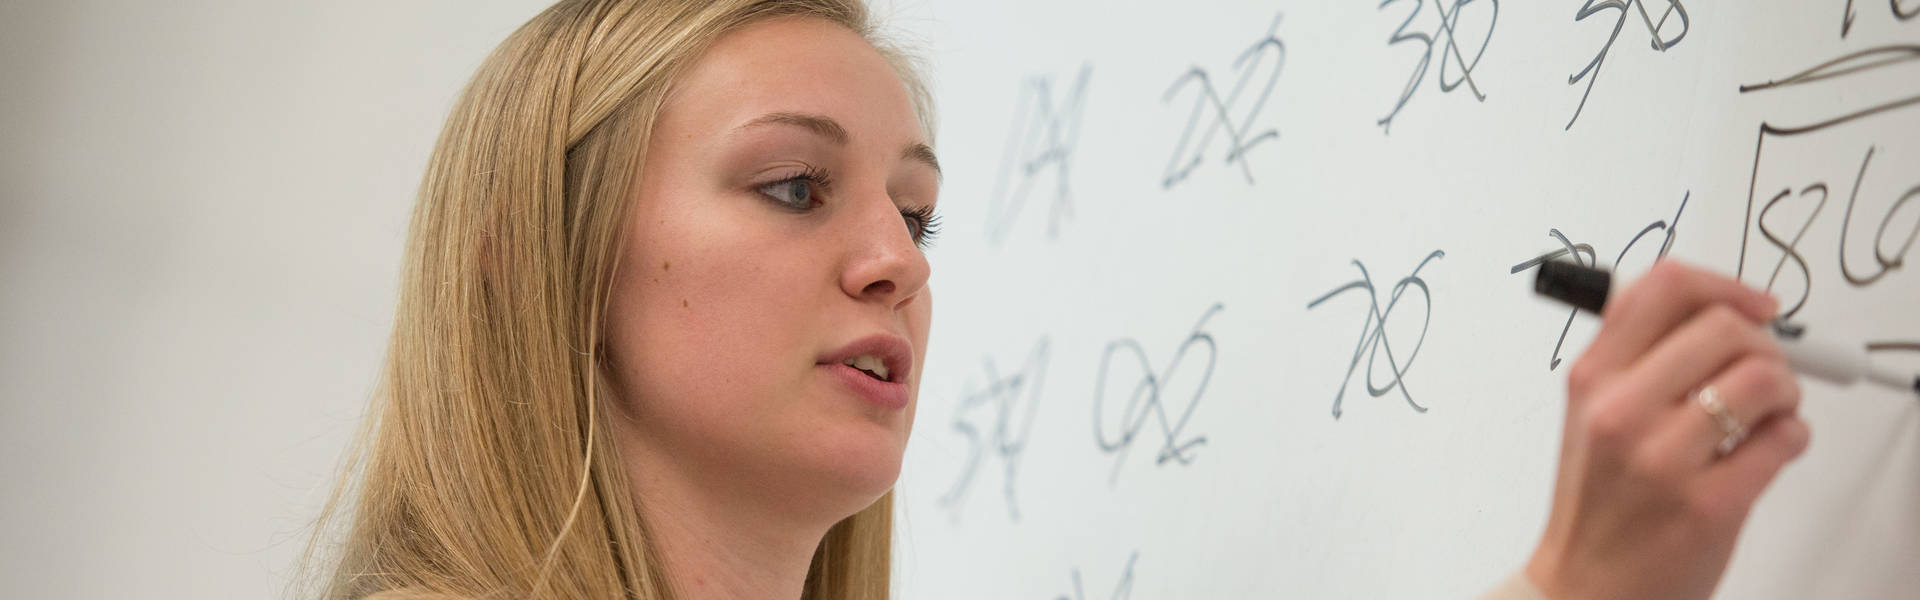 Female student at the white board doing math. 